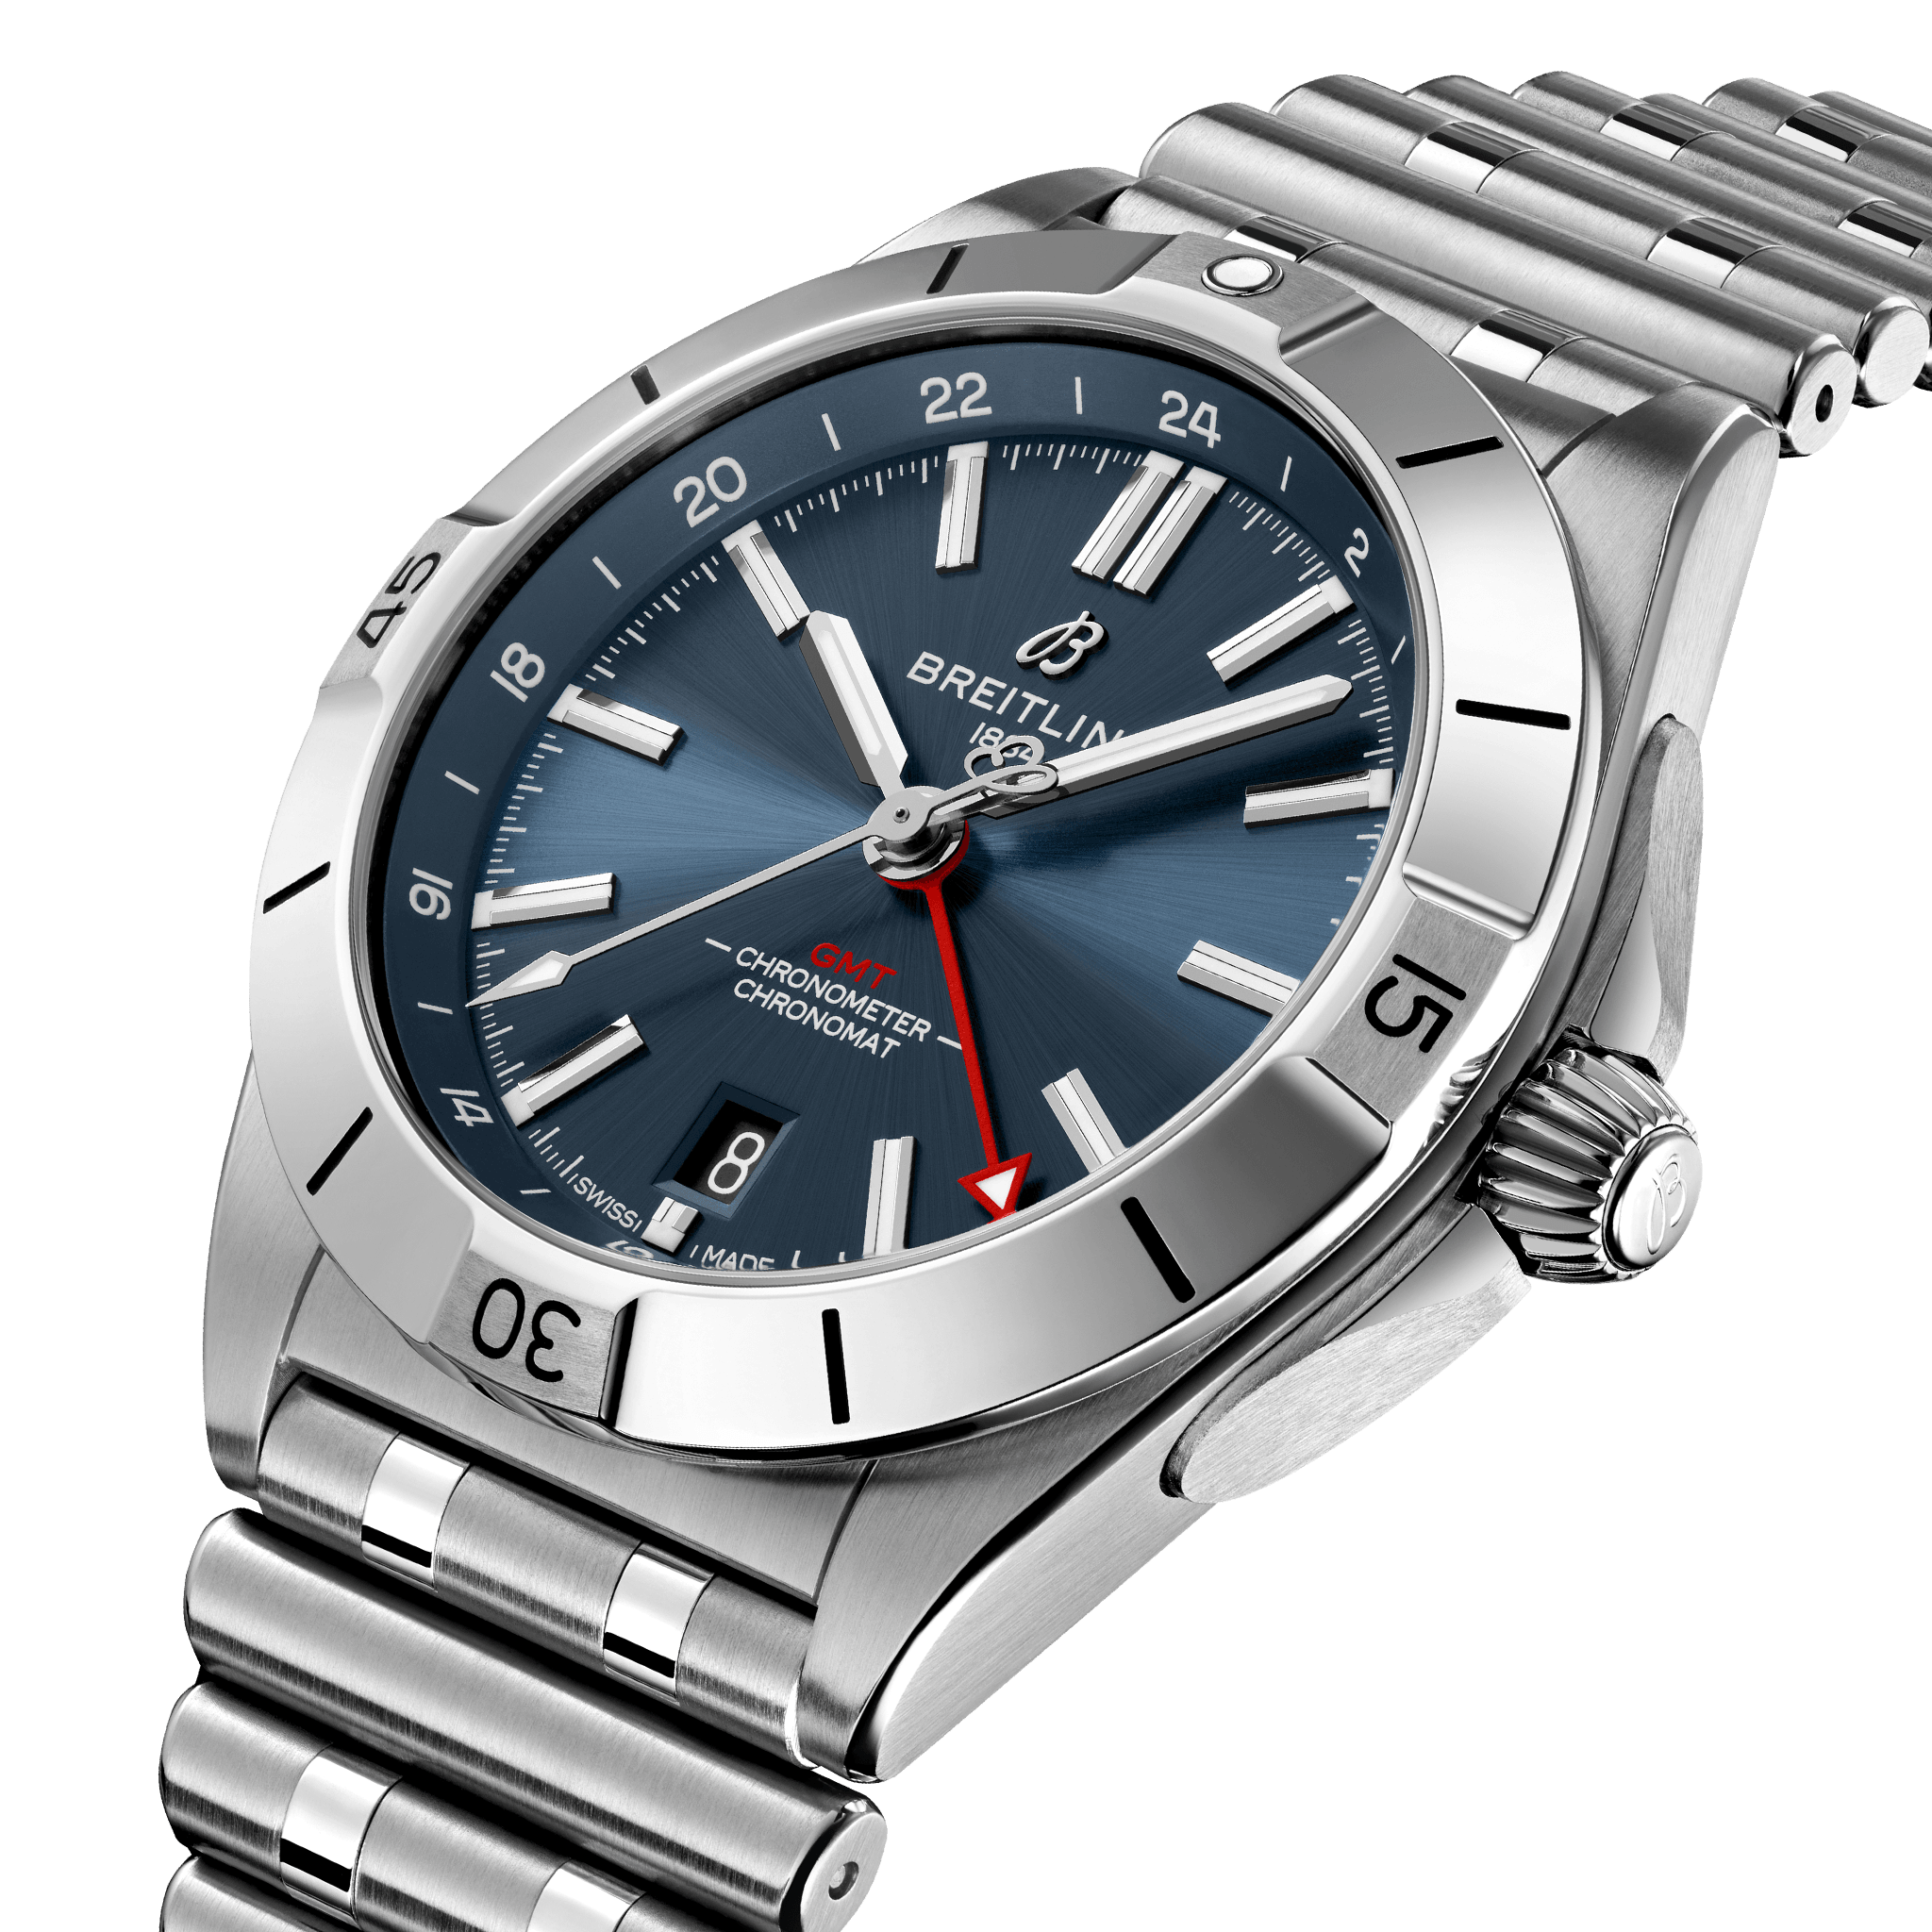 Which Blue Dial GMT? (Breitling Chronomat or Grand Seiko SBGM245) |  WatchinTyme